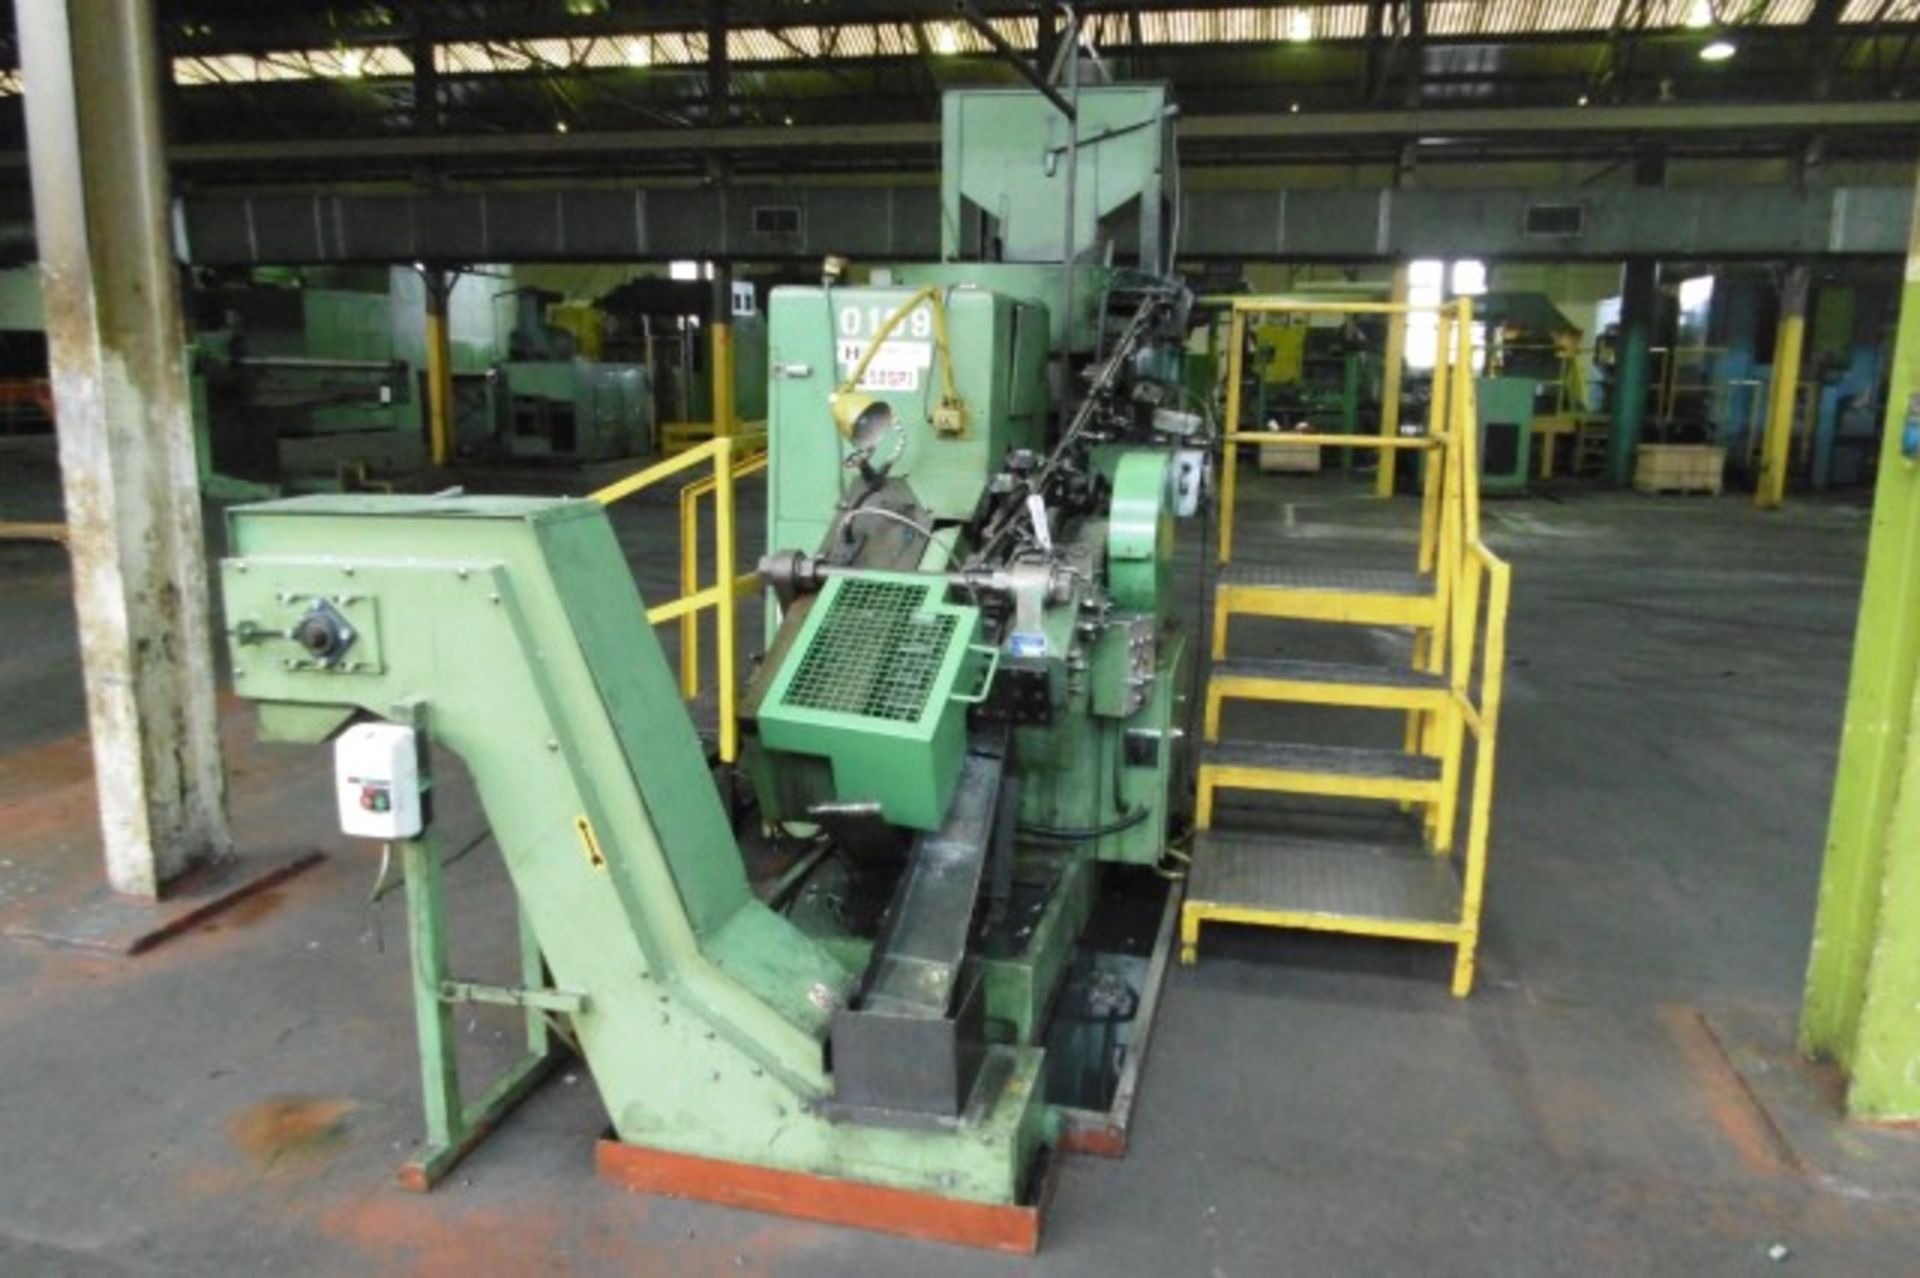 Saspi No 30 M12 thread roller, Serial No: 27-02-03, complete with vibratory hopper feed, vibratory